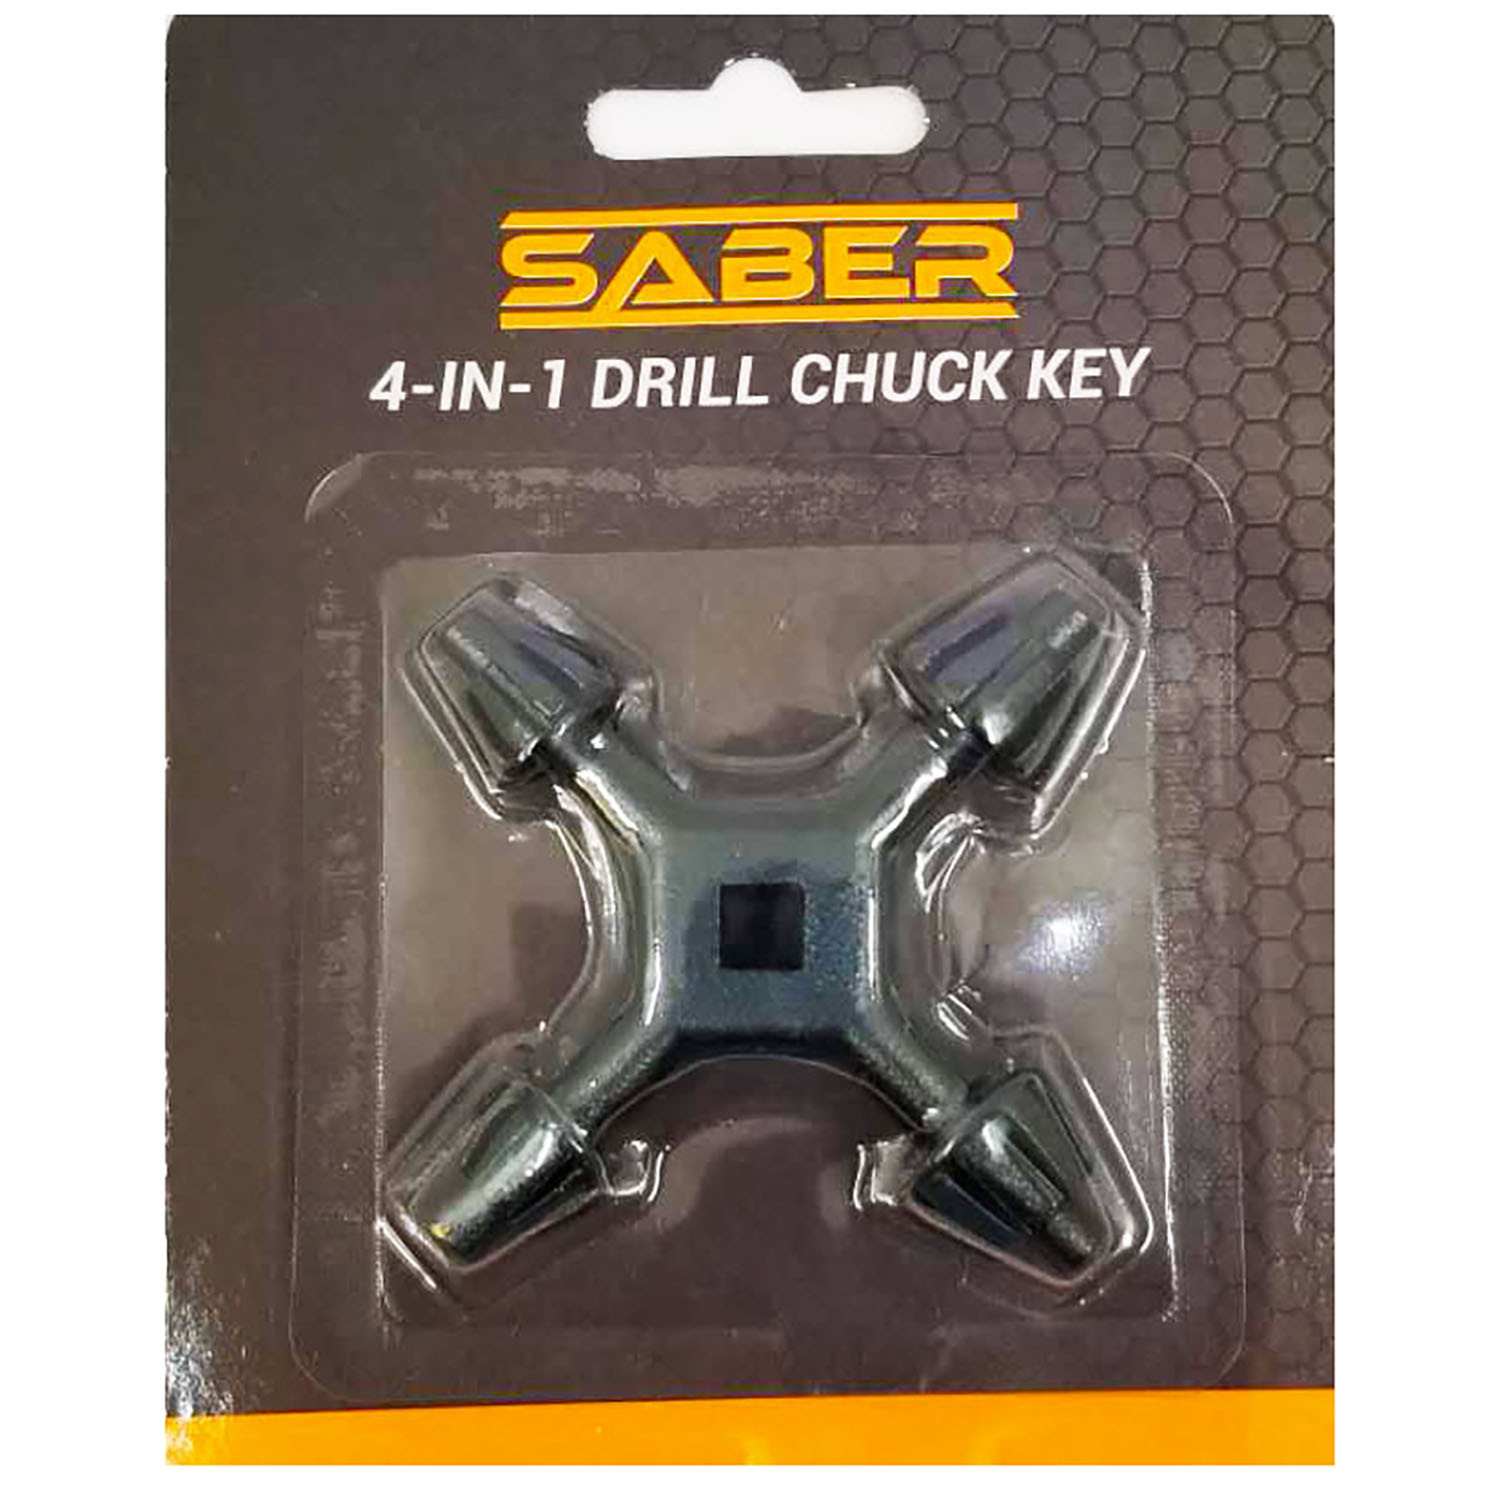 Saber 4 in 1 Drill Chuck Key Image